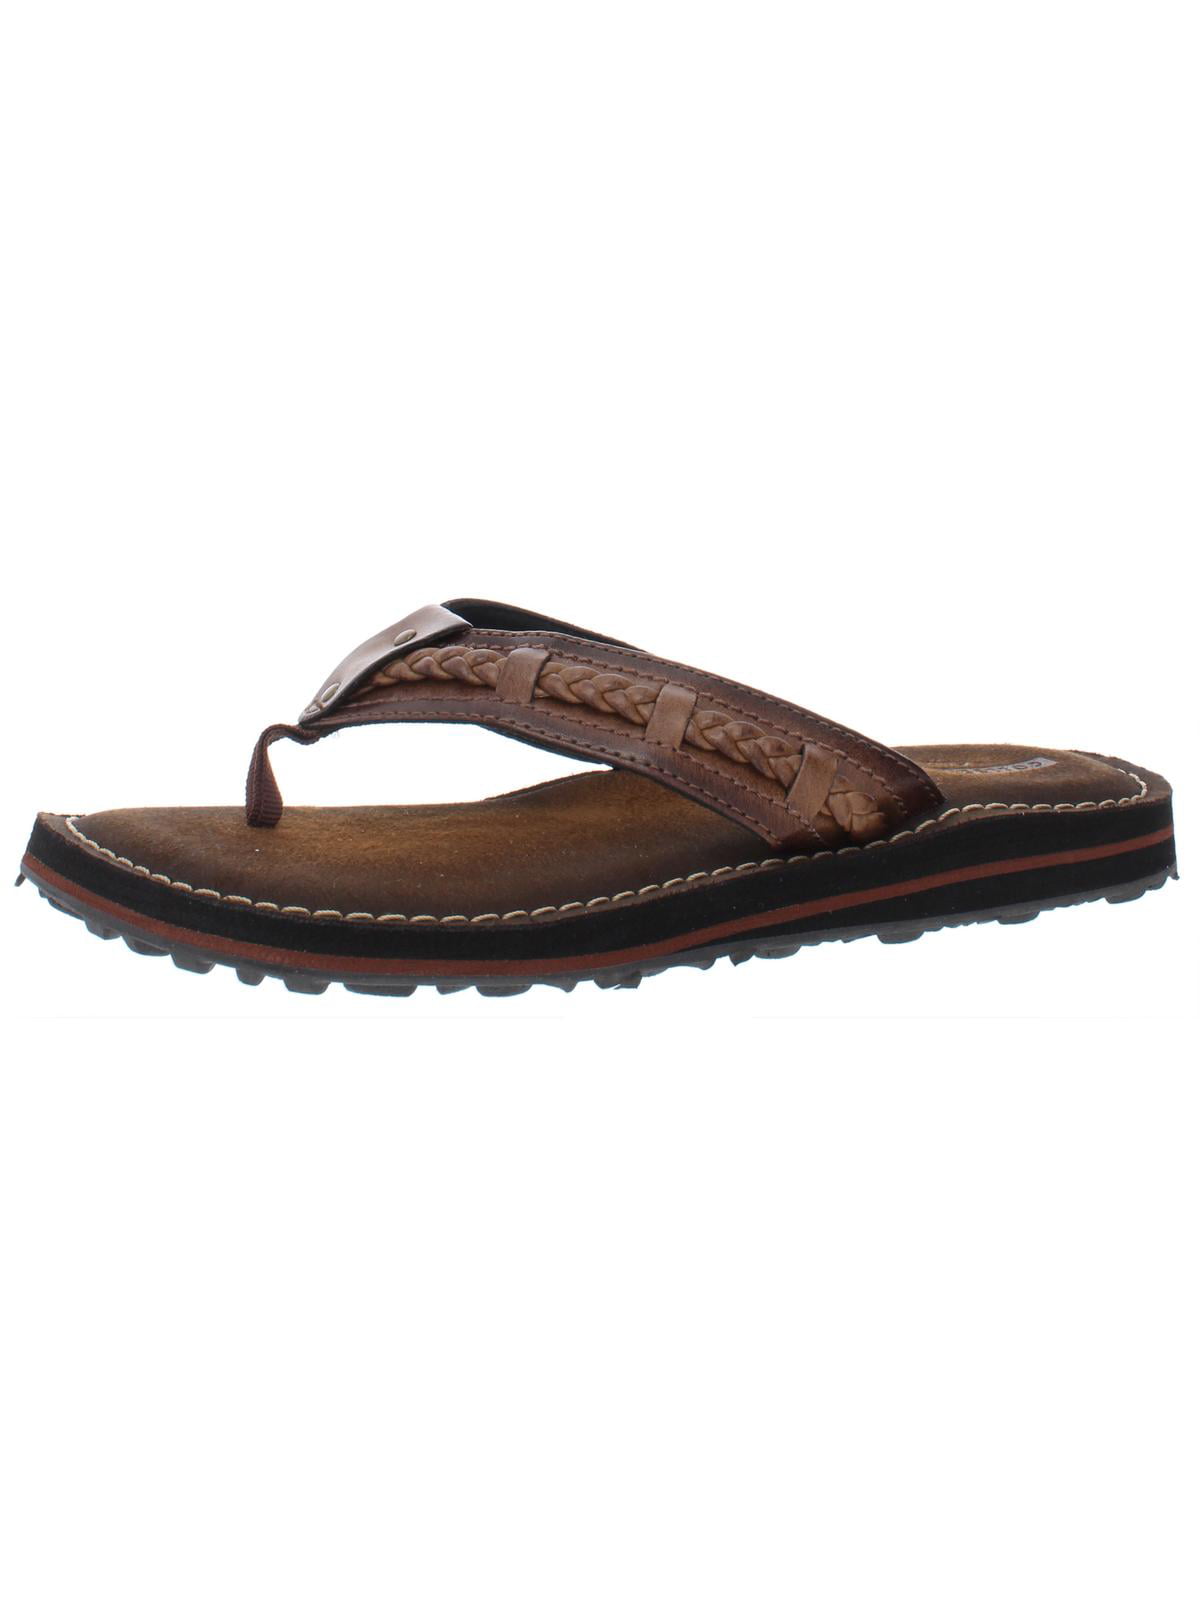 Clarks - Clarks Womens Fenner Nerice Faux Leather Thong Flip-Flops ...